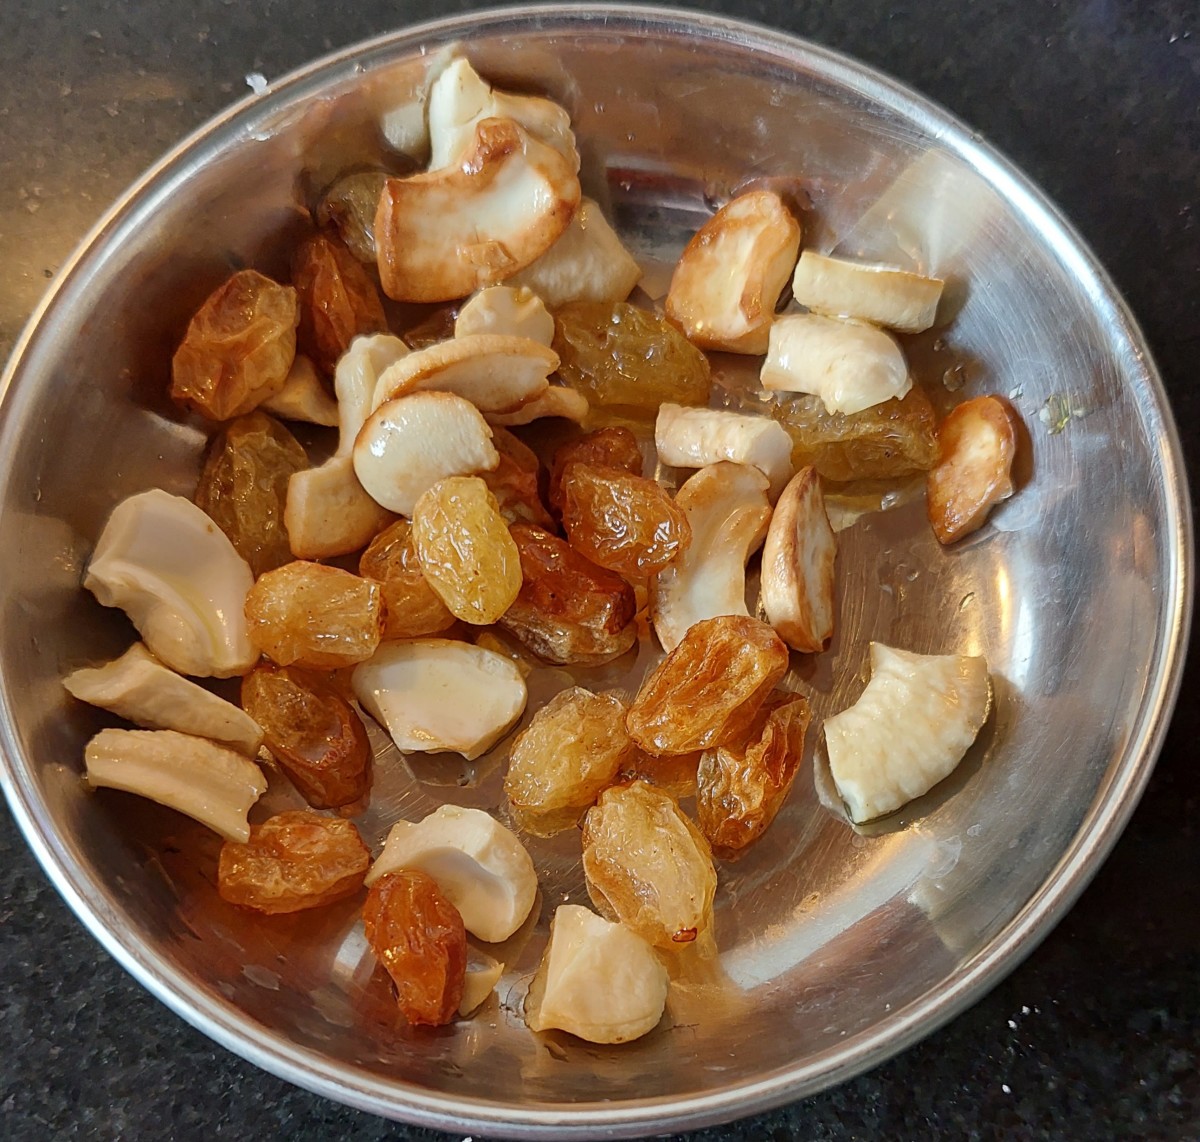 Fry till cashews turn golden and raisins puff up. Remove from pan and set aside.